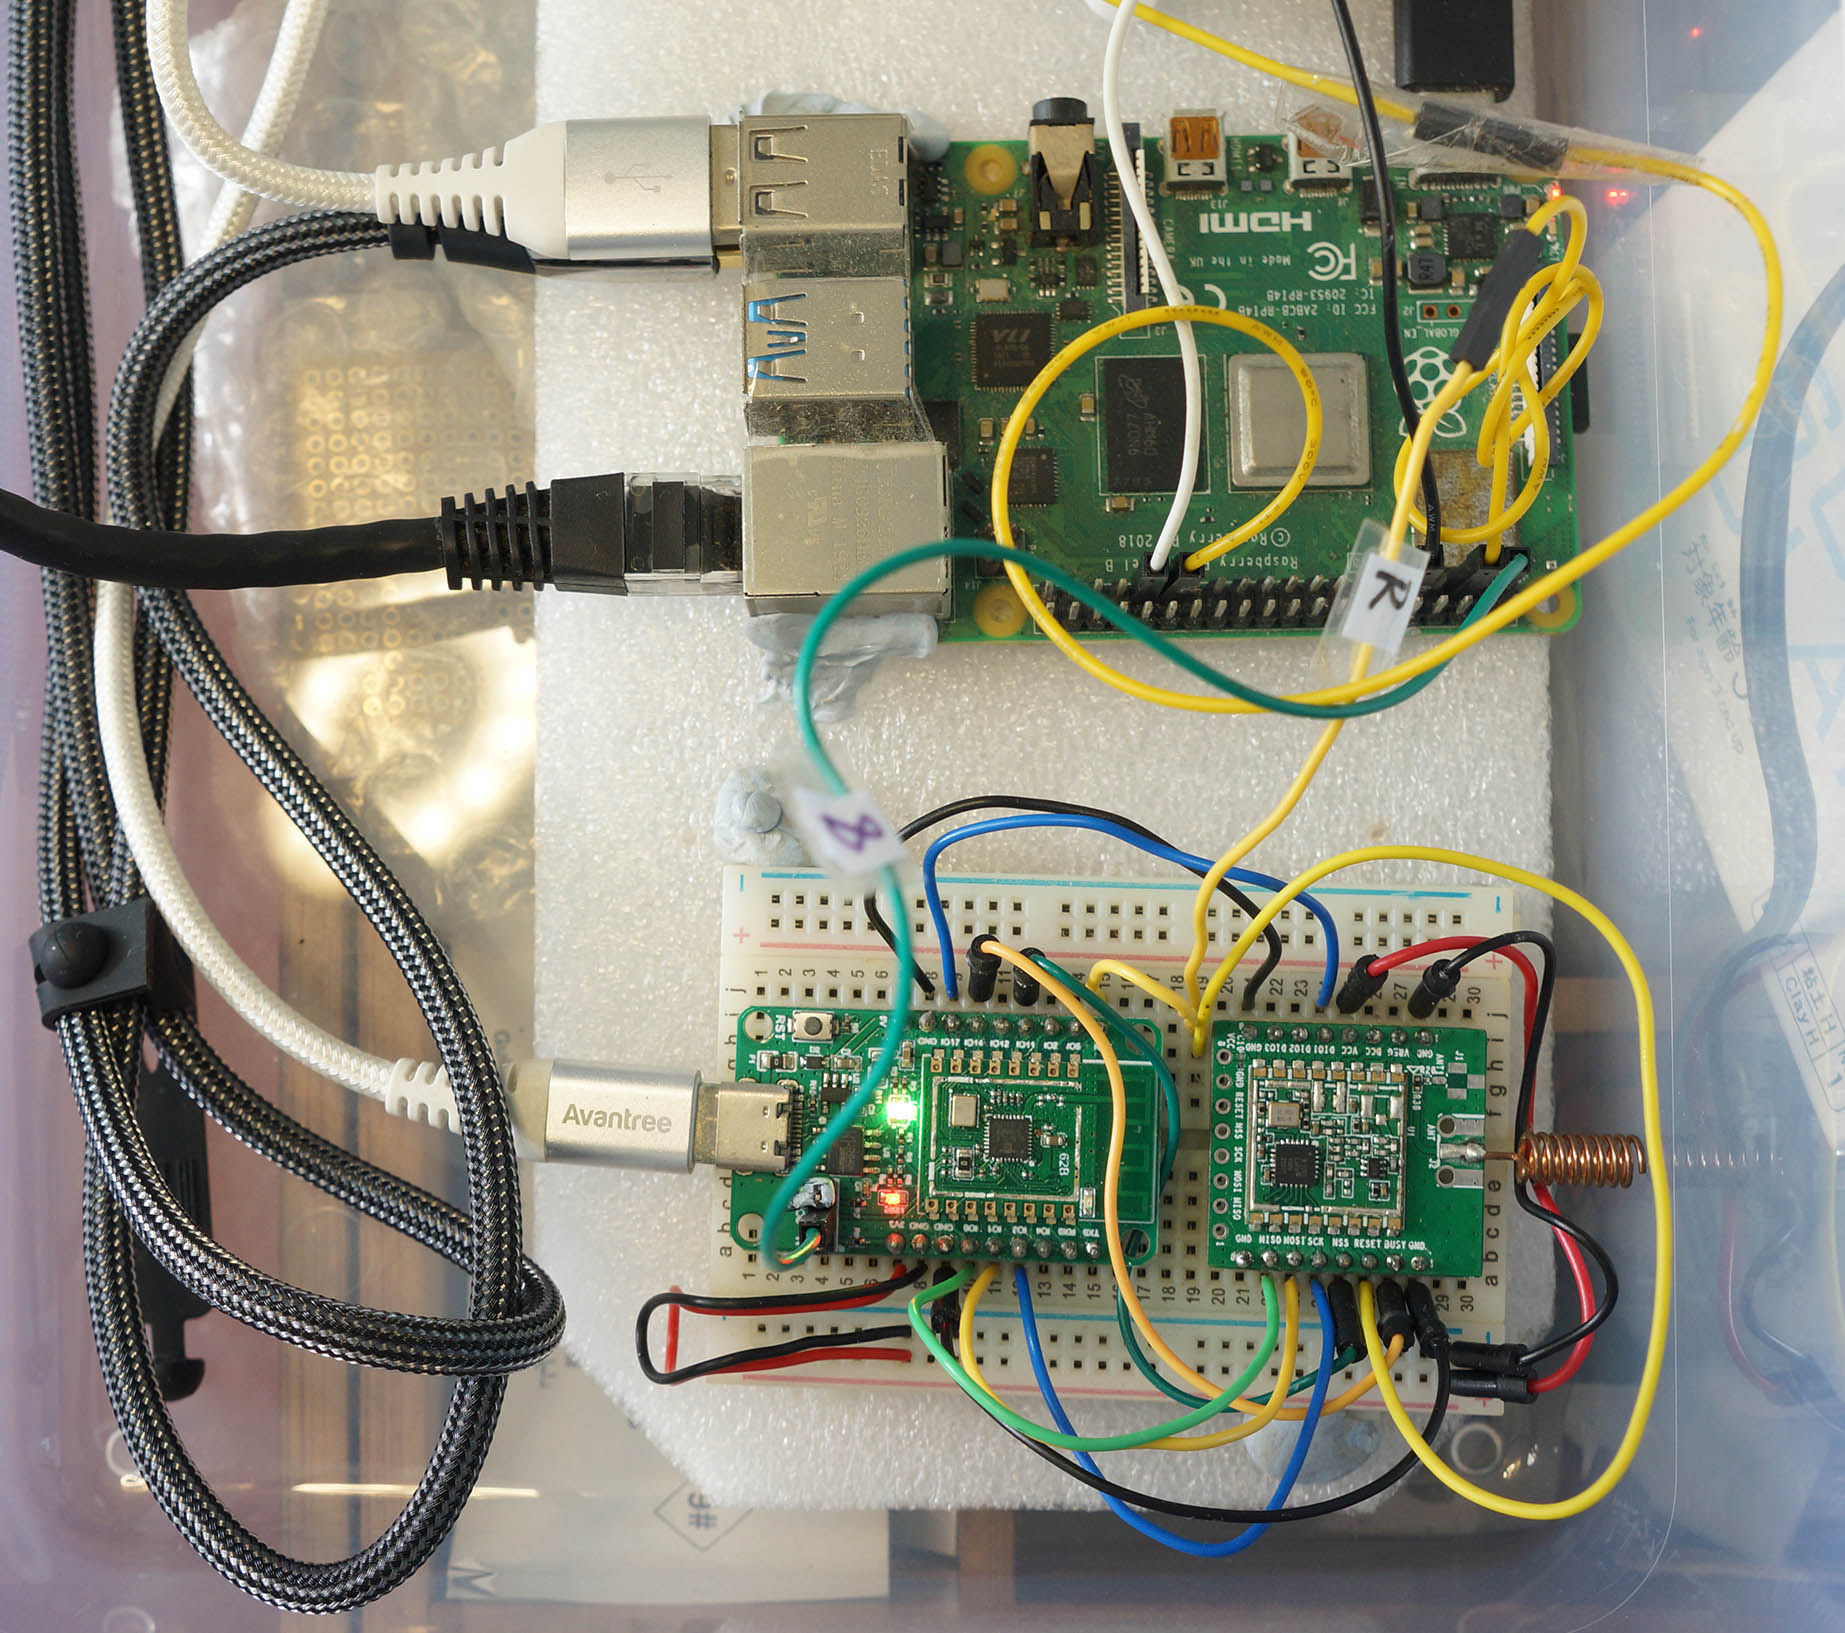 PineCone BL602 RISC-V Board (bottom) connected to Single-Board Computer (top) for Auto Flash and Test